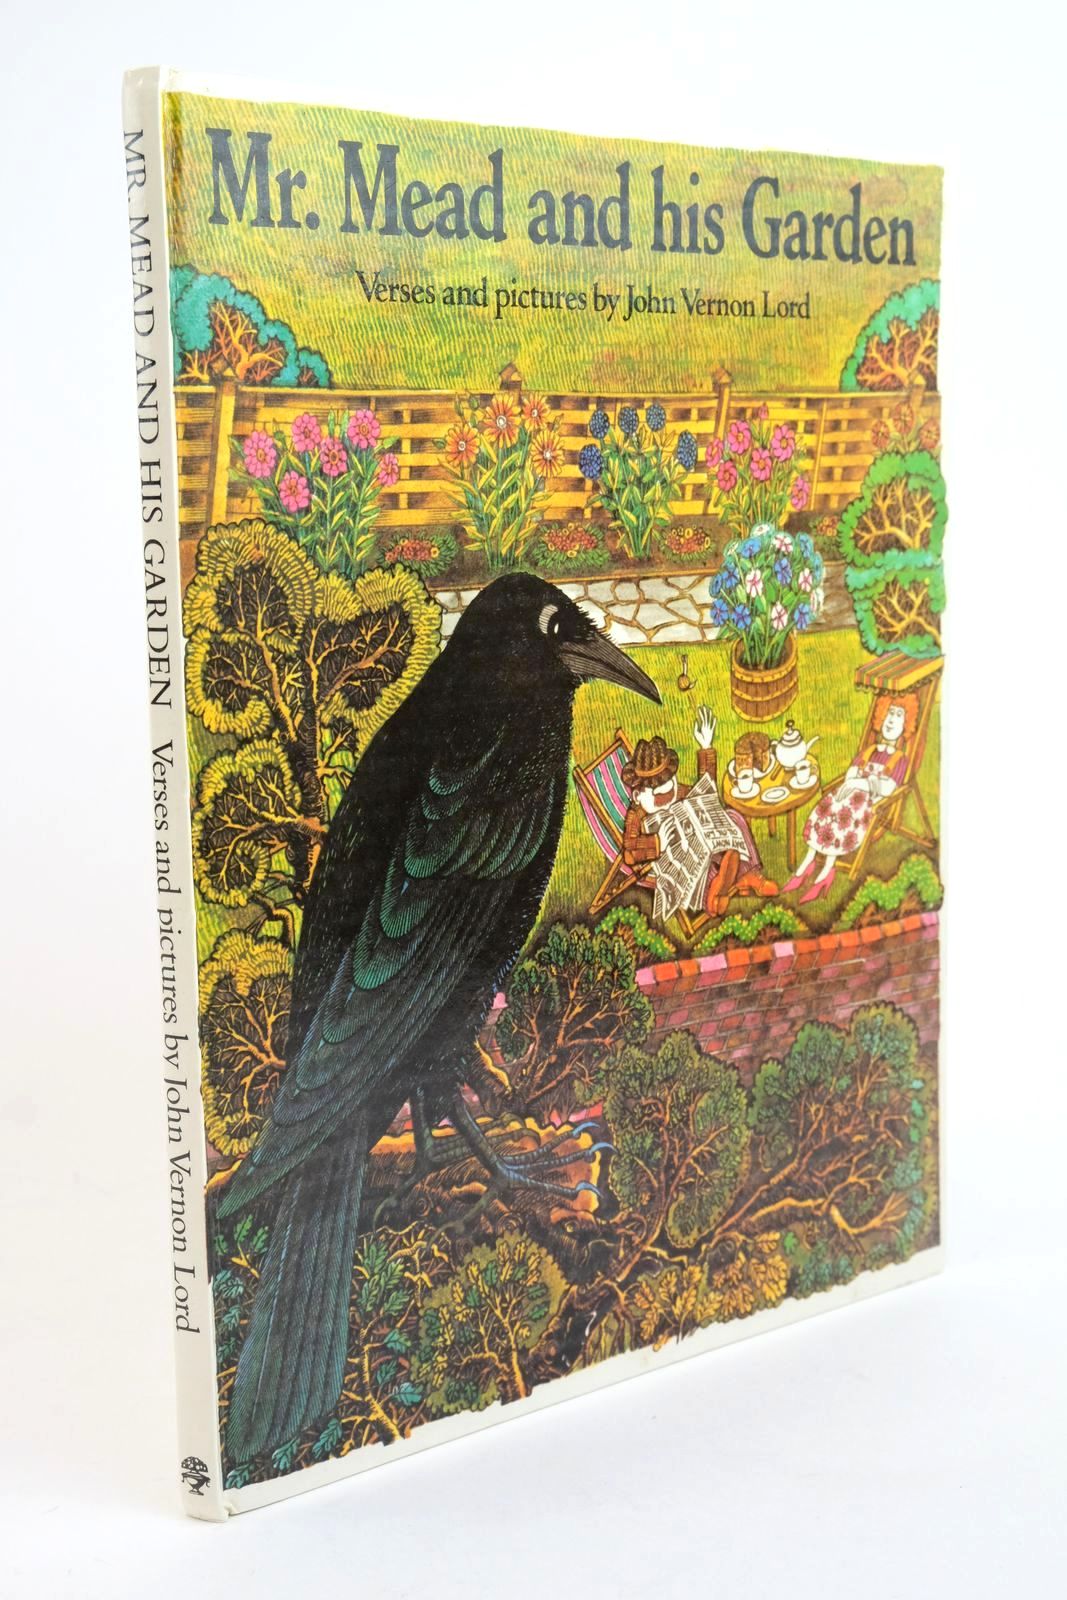 Photo of MR. MEAD AND HIS GARDEN written by Lord, John Vernon illustrated by Lord, John Vernon published by Jonathan Cape (STOCK CODE: 1321862)  for sale by Stella & Rose's Books